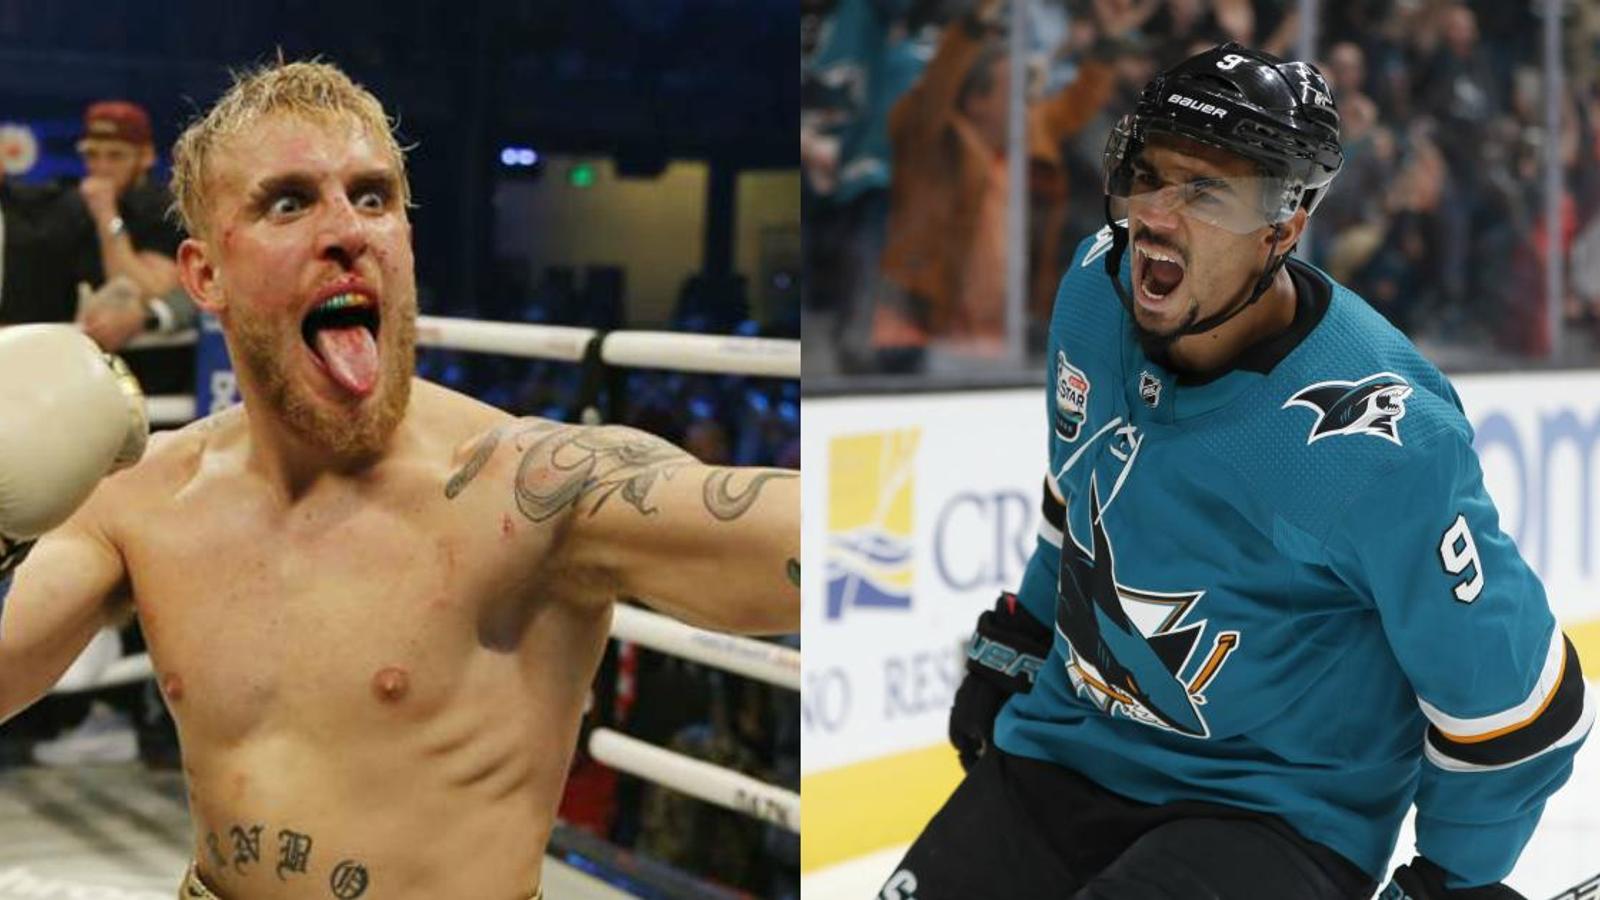 Evander Kane issues an official challenge to Jake Paul.